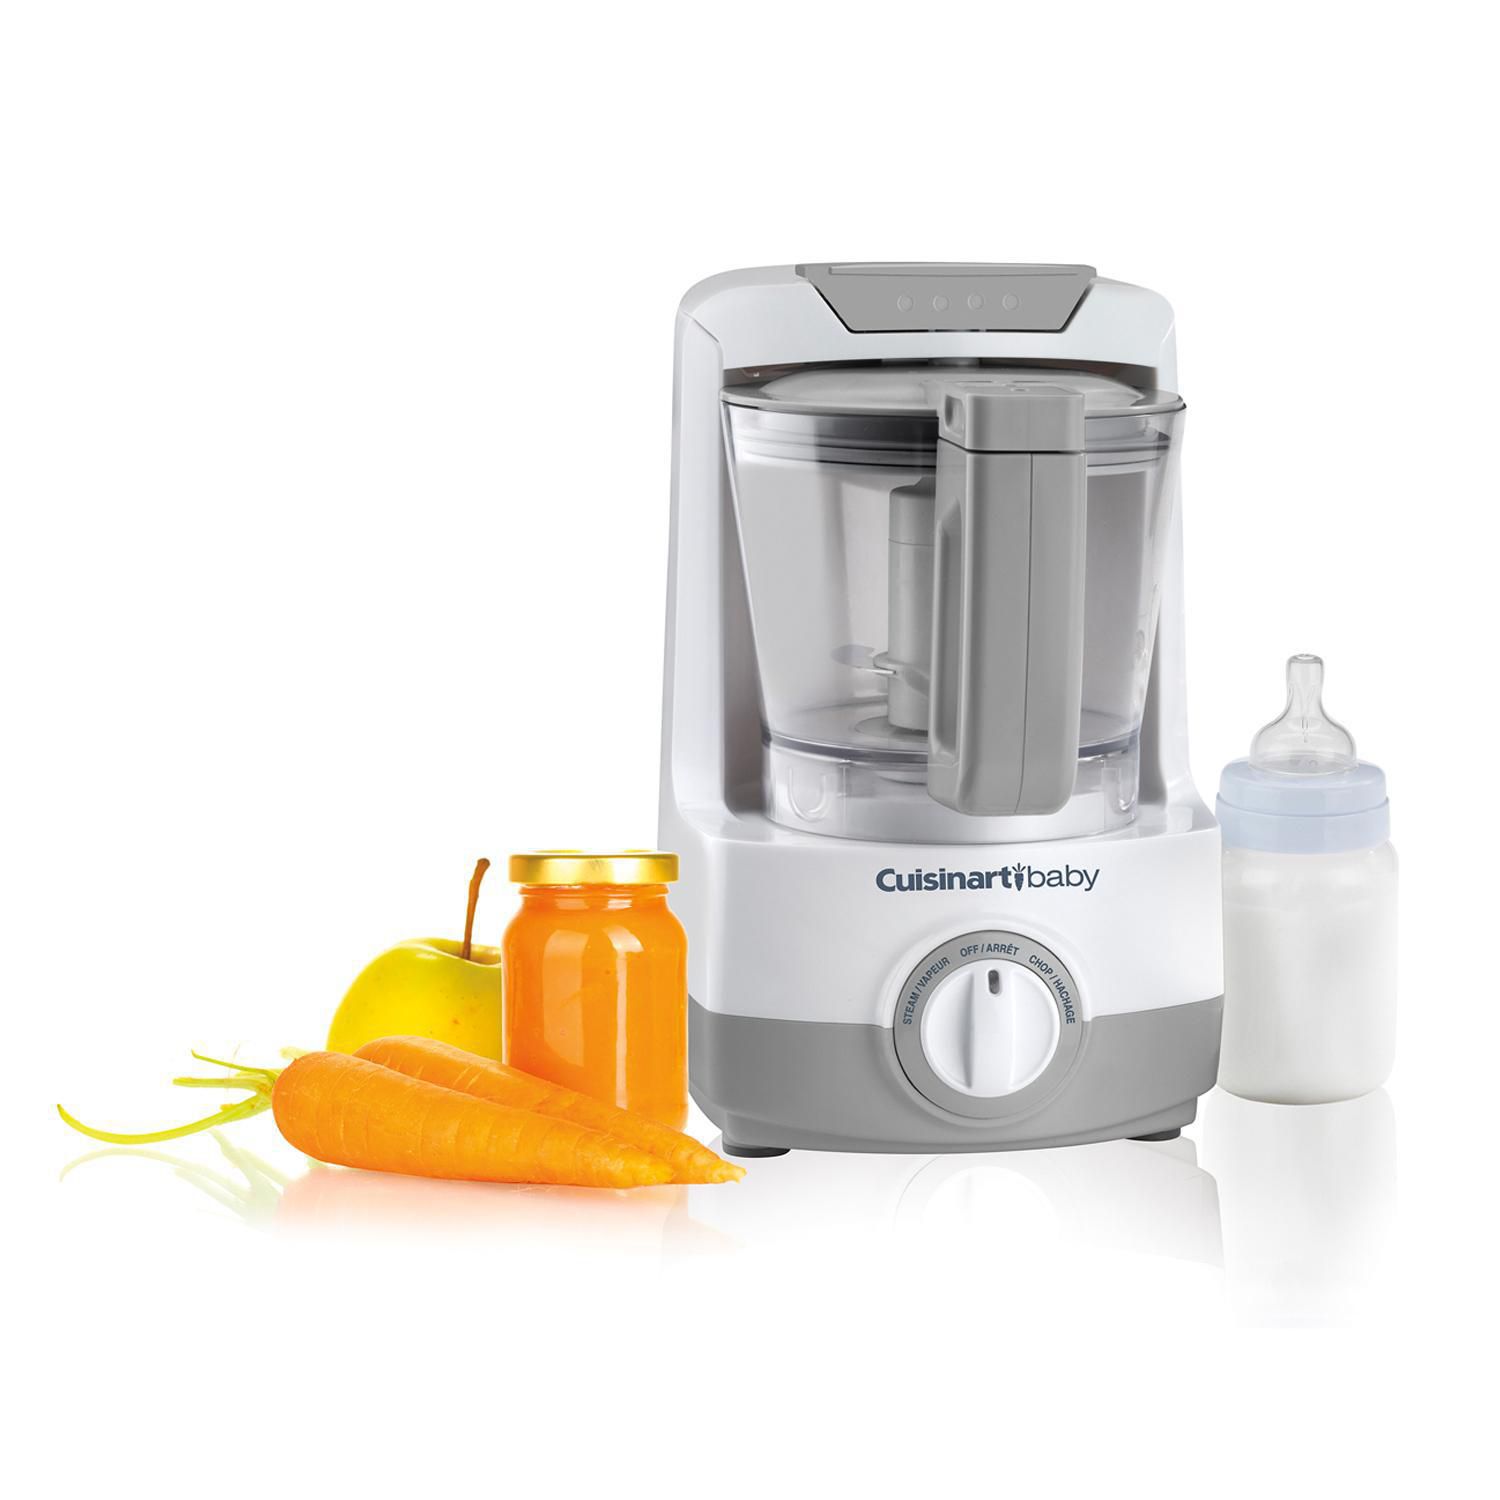 Cuisinart 2-in-1 Baby Food Maker and Bottle Warmer - BFM-1000C